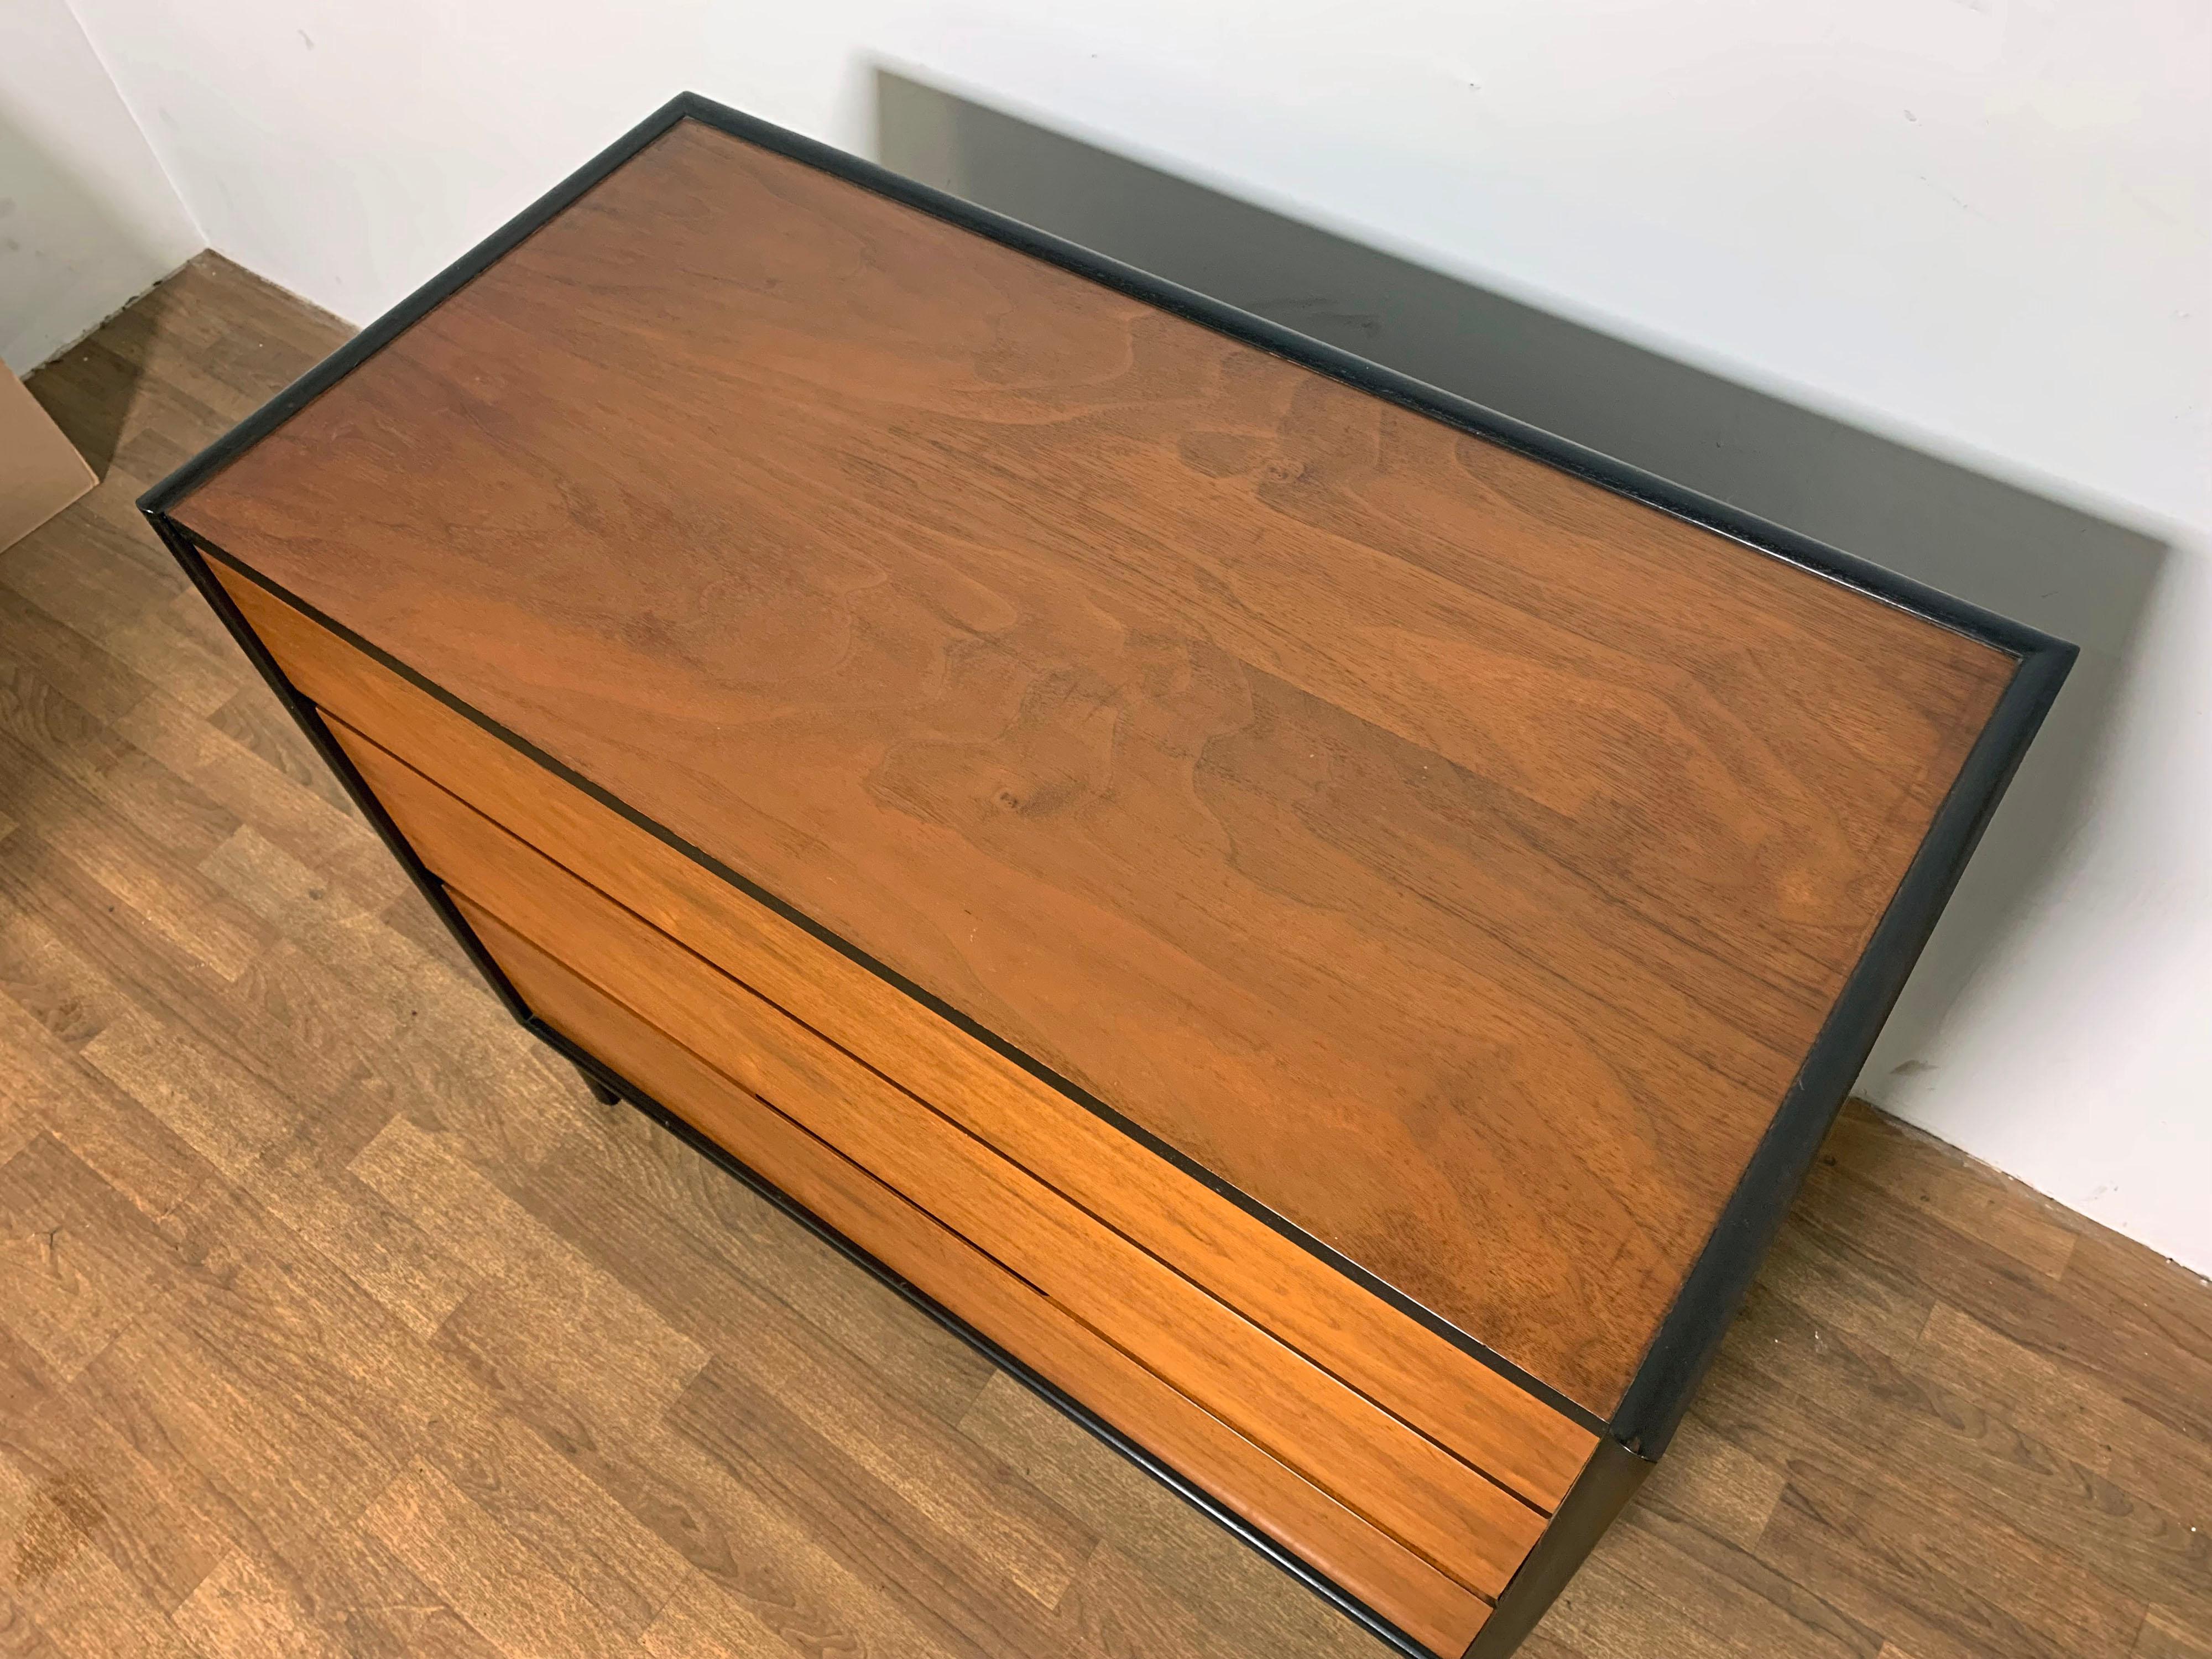 Three drawer dresser by Edward Wormley for Dunbar with two-tone contrasting Honduran mahogany drawer fronts, top and sides, and rosewood trimmed case, circa 1960s.